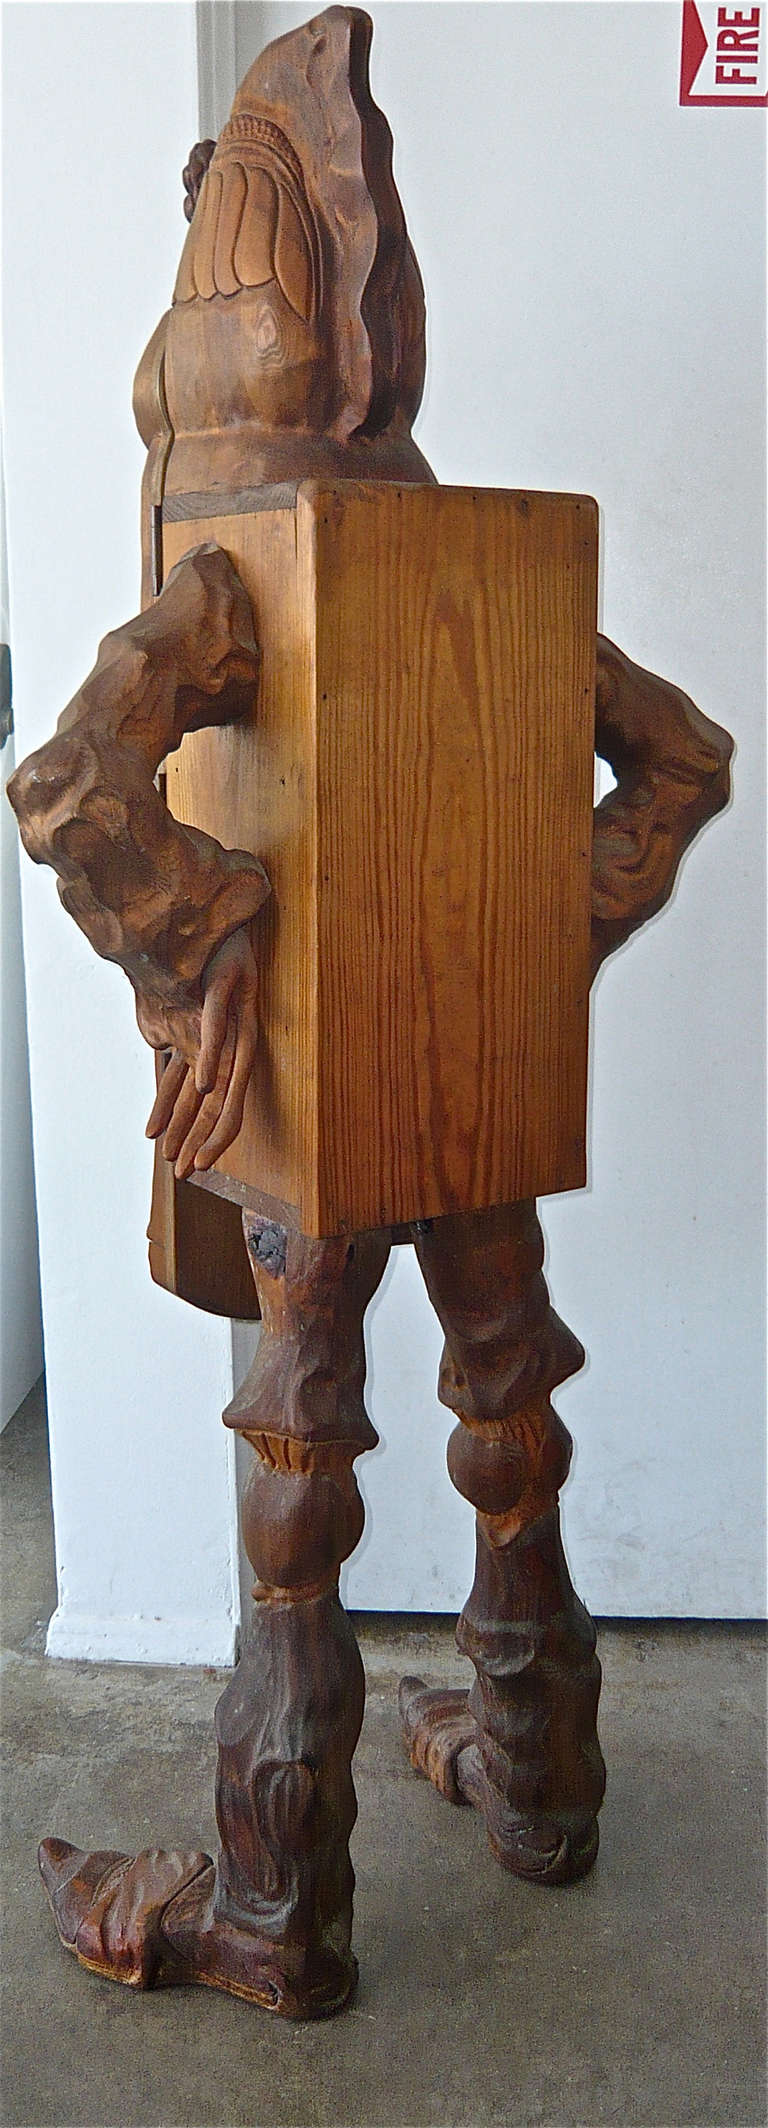 Hand Carved Gnome by R.A. Pitz 2